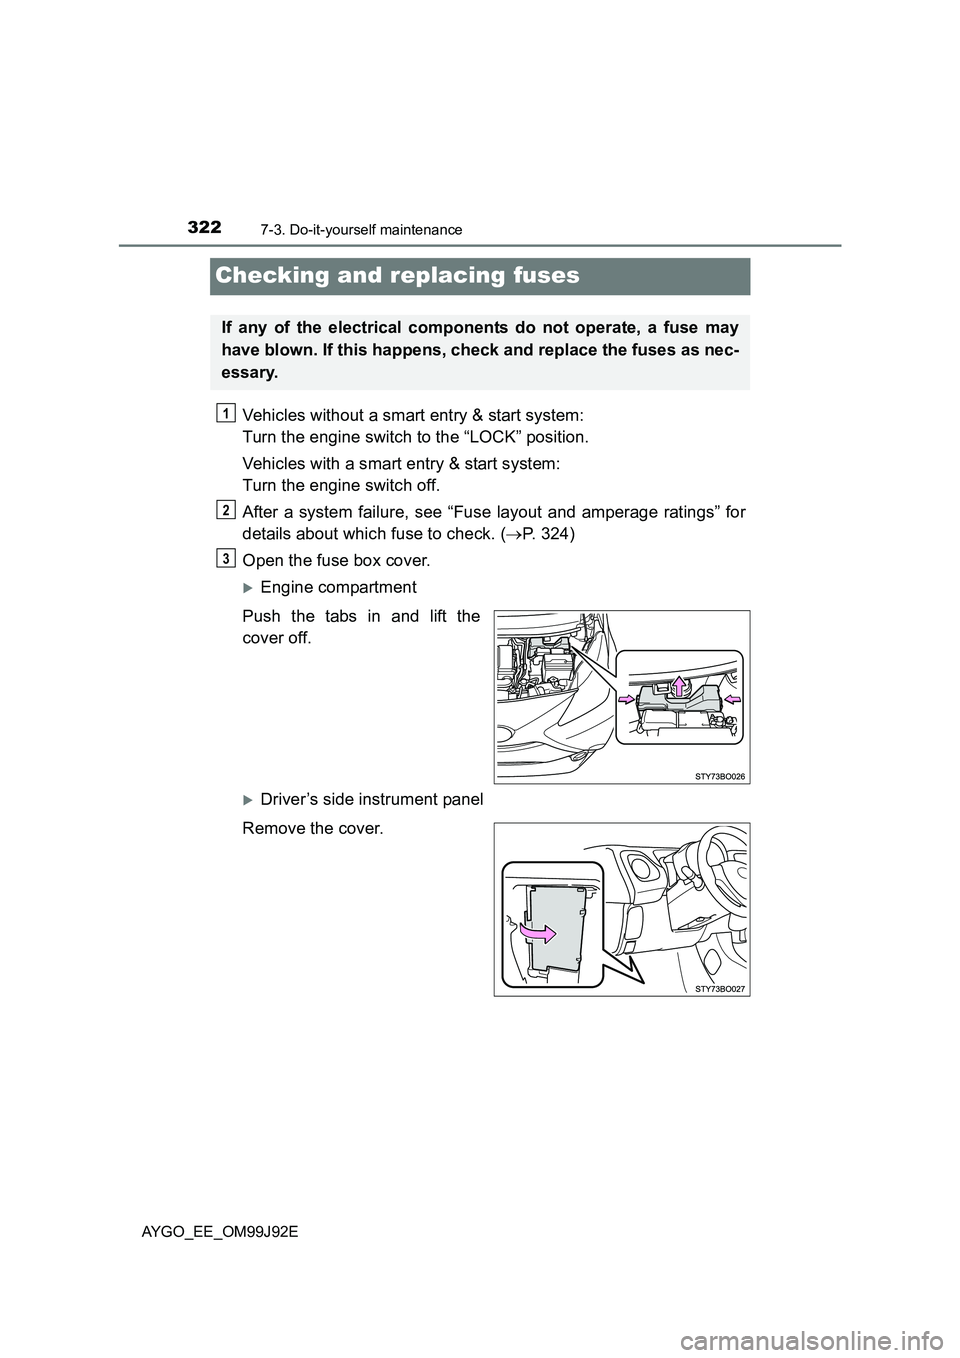 TOYOTA AYGO 2015  Owners Manual (in English) 3227-3. Do-it-yourself maintenance
AYGO_EE_OM99J92E
Checking and replacing fuses
Vehicles without a smart entry & start system:  
Turn the engine switch to the “LOCK” position. 
Vehicles with a sm